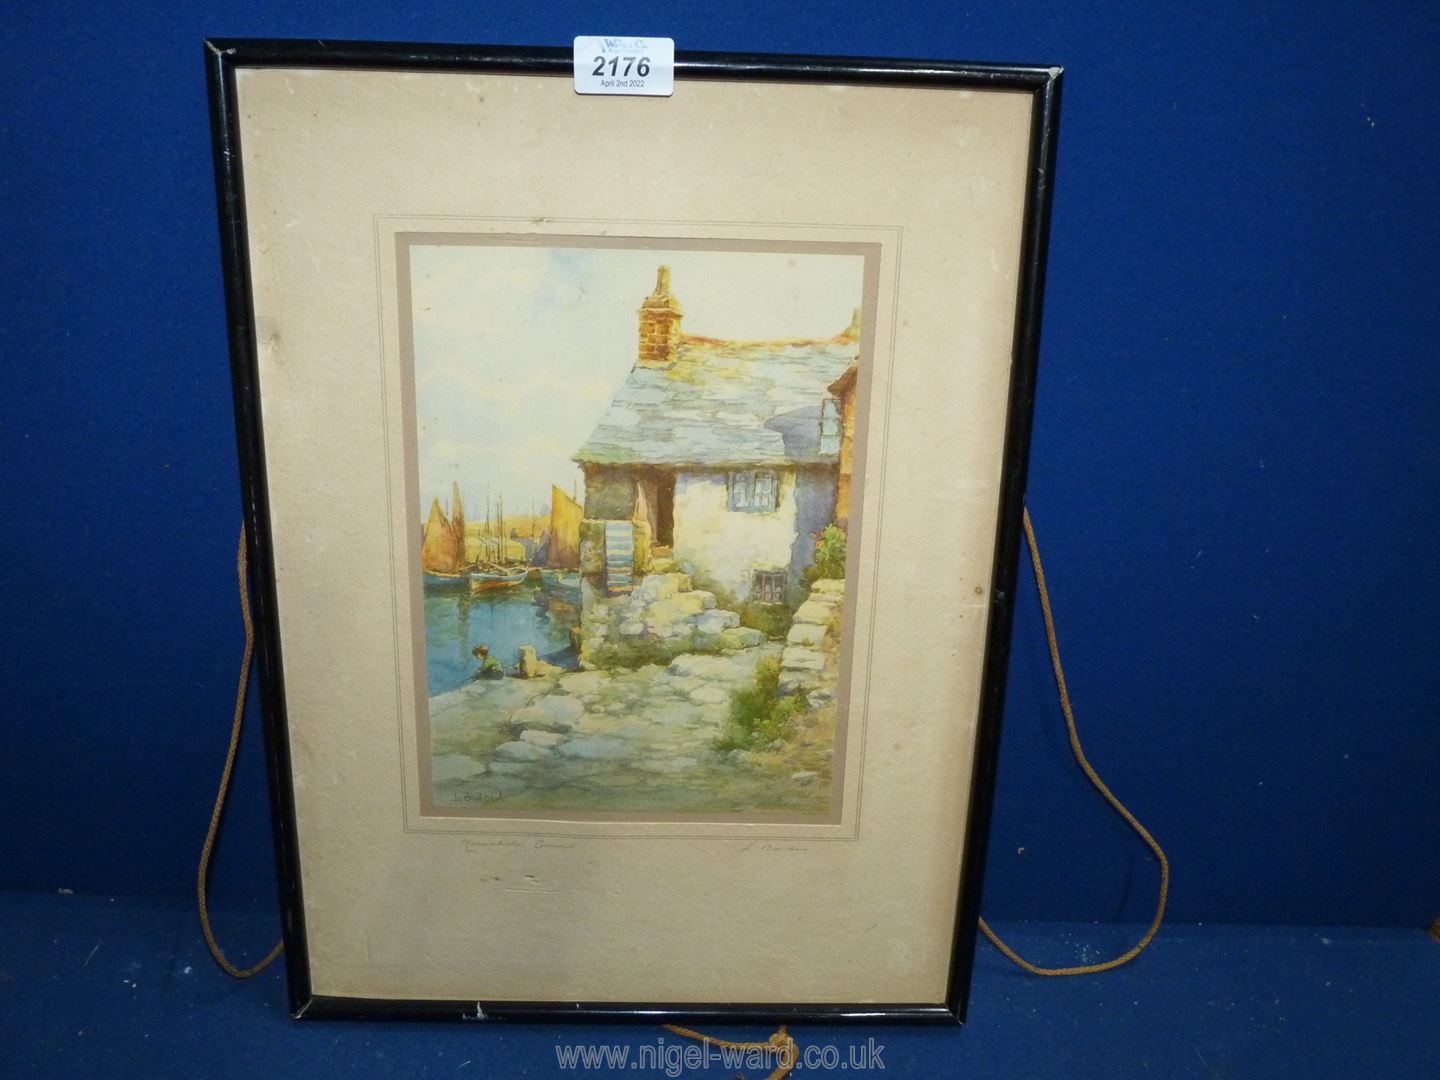 A Print of Mousehole, Cornwall, after L. Bowden.